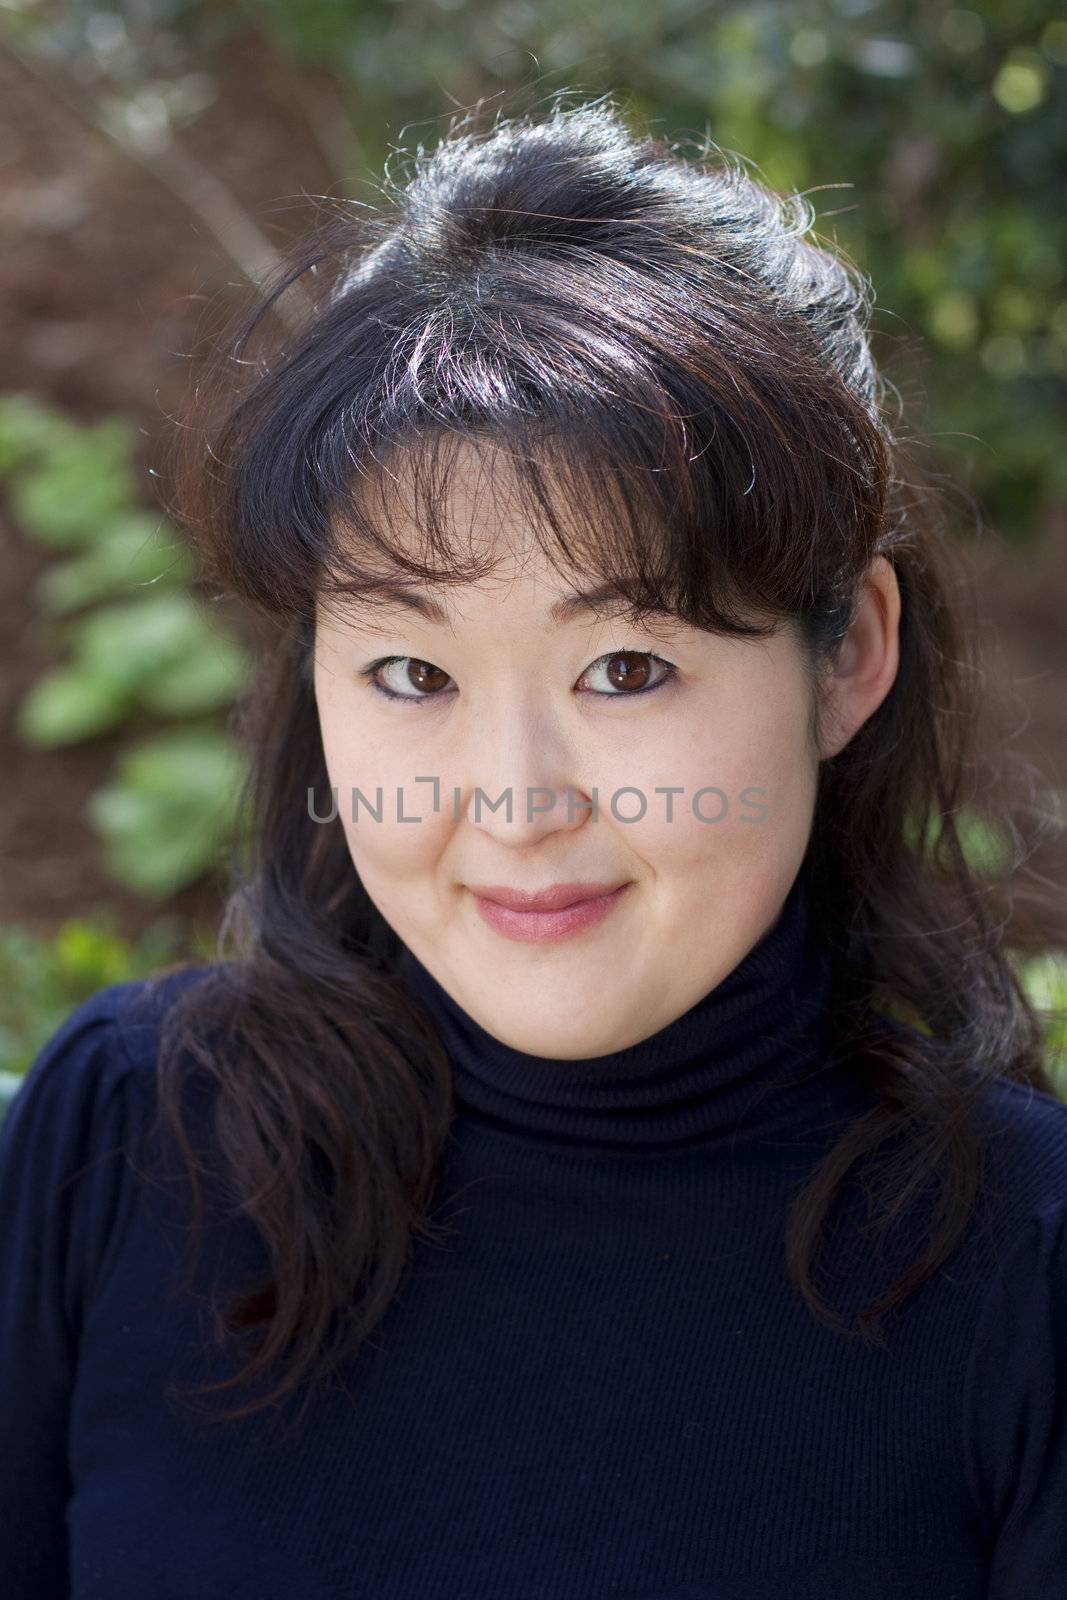 Candid portrait of Japanese woman by annems